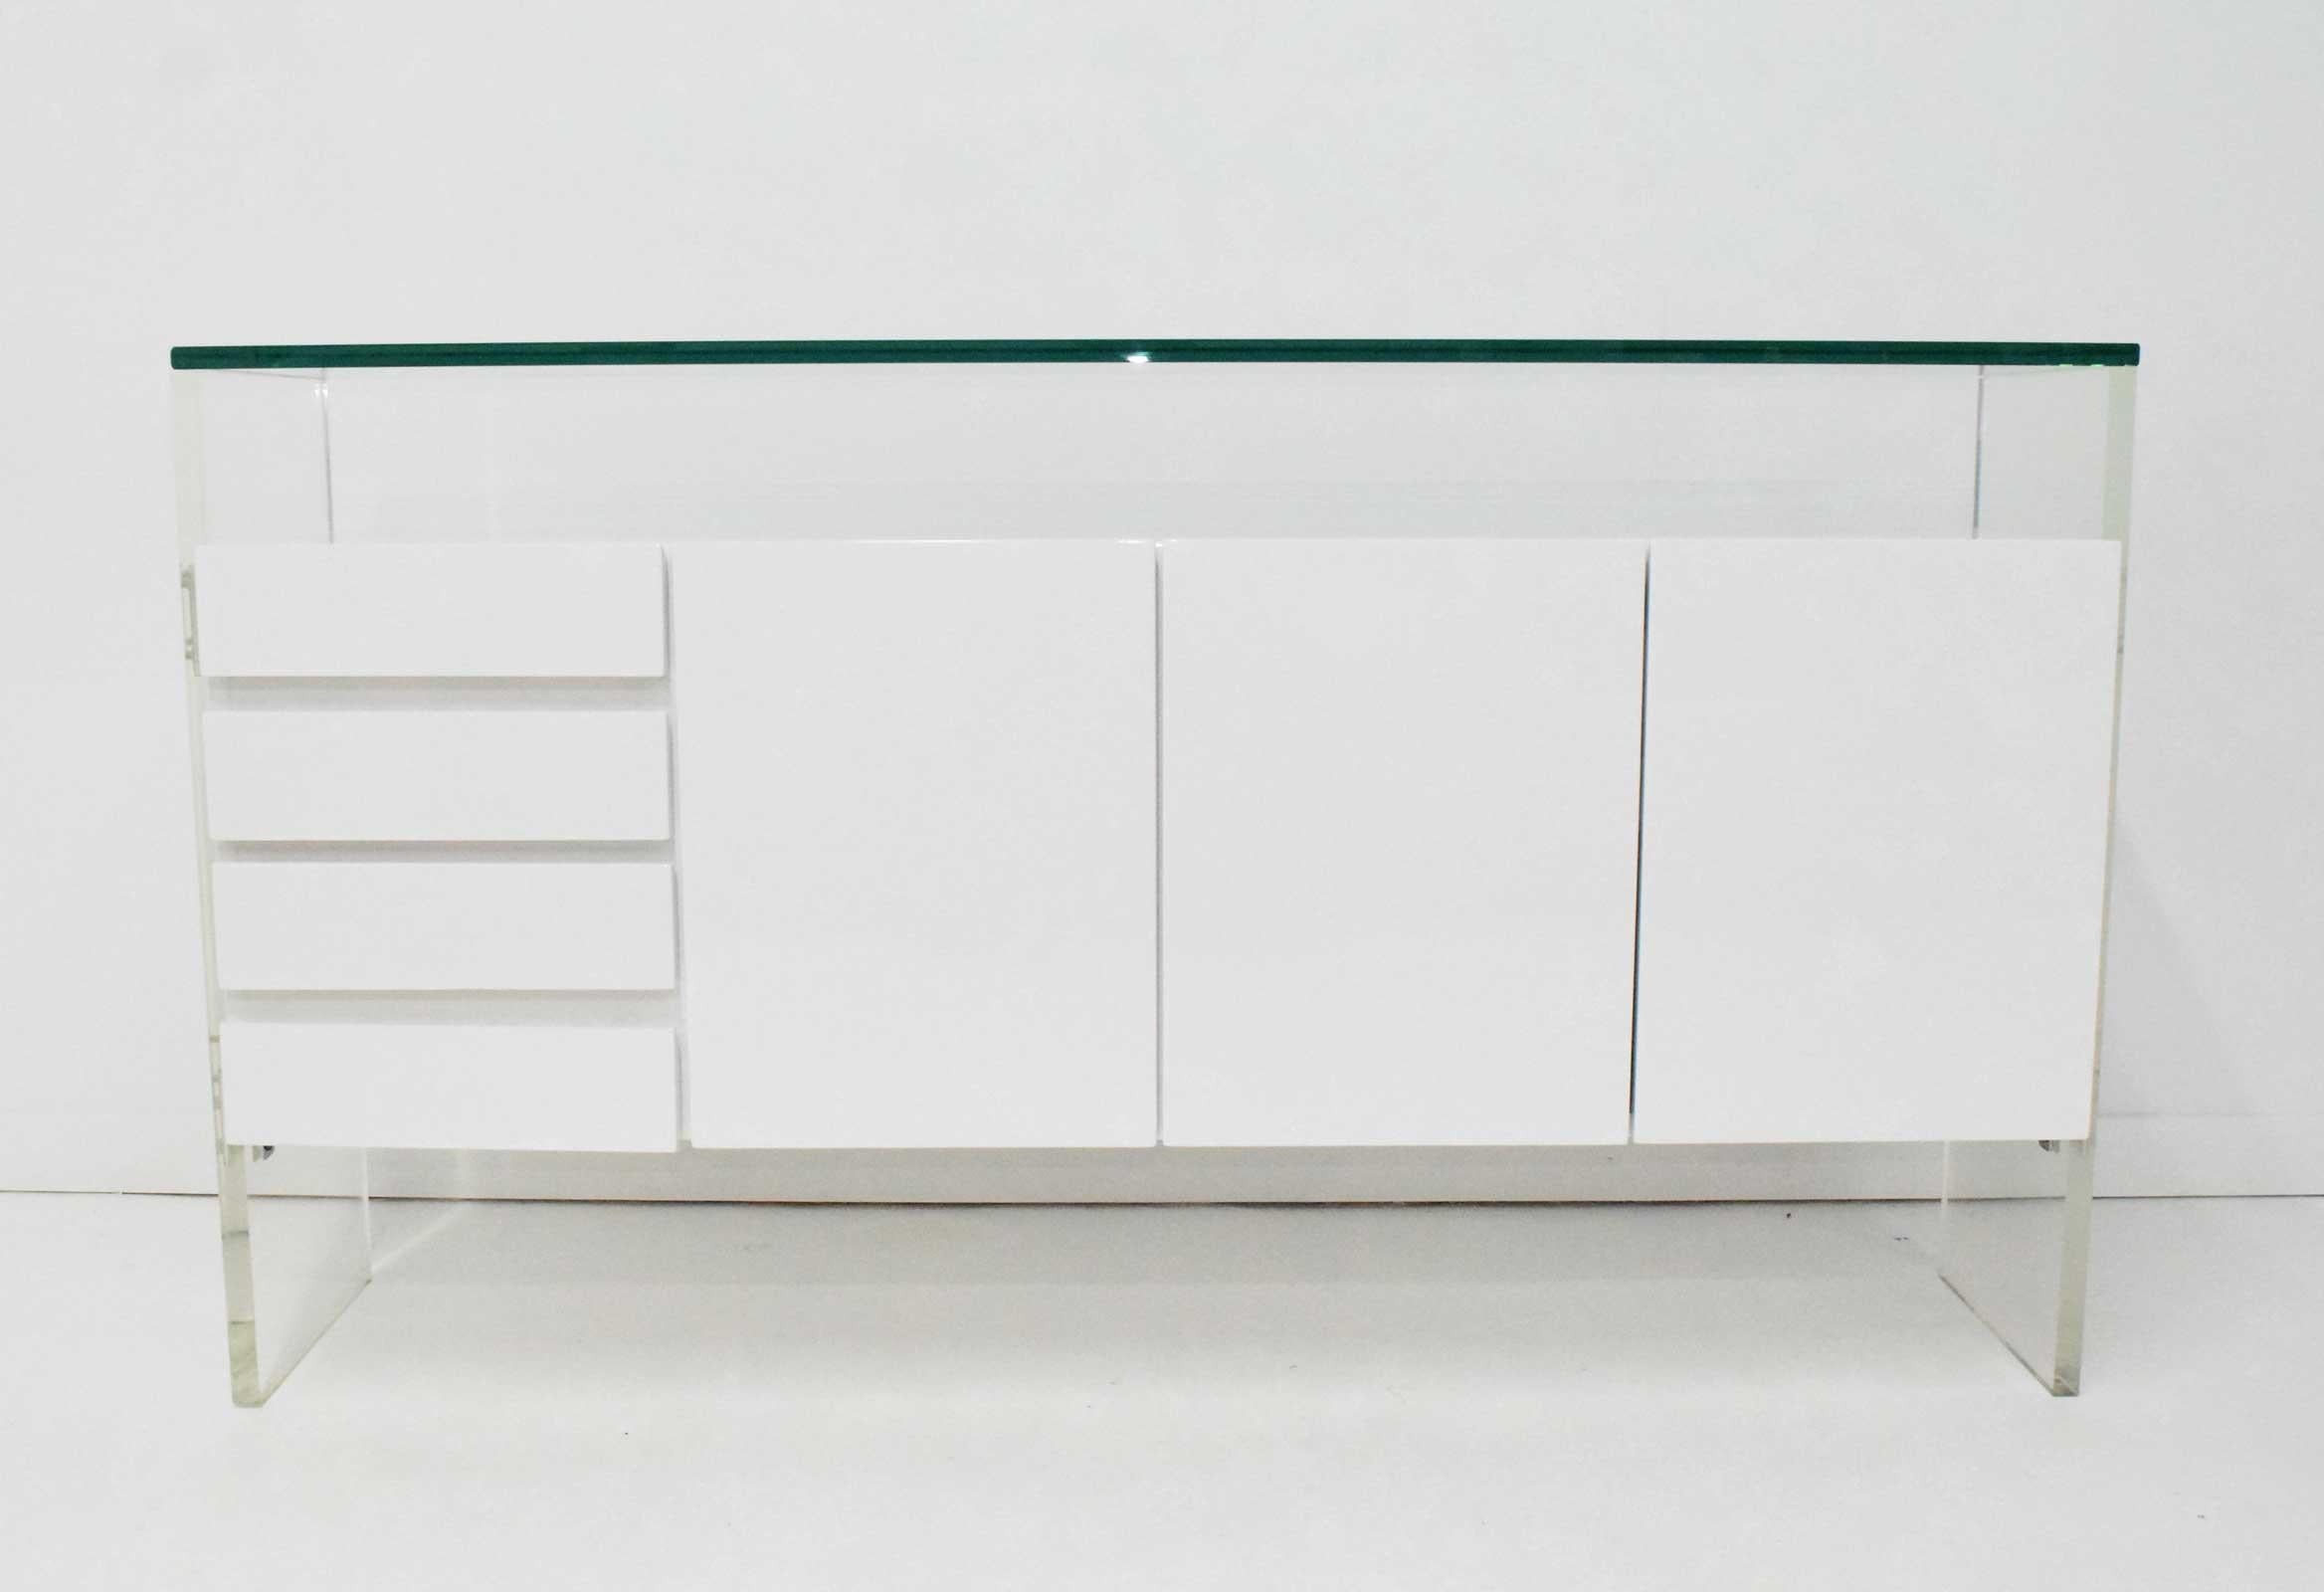 One of his iconic designs, a restored in white lacquer sideboard by Milo Baughman. Sideboard features a floating case piece that includes three doors with shelving and silverware storage. On the left side is four drawers. The thick Lucite legs